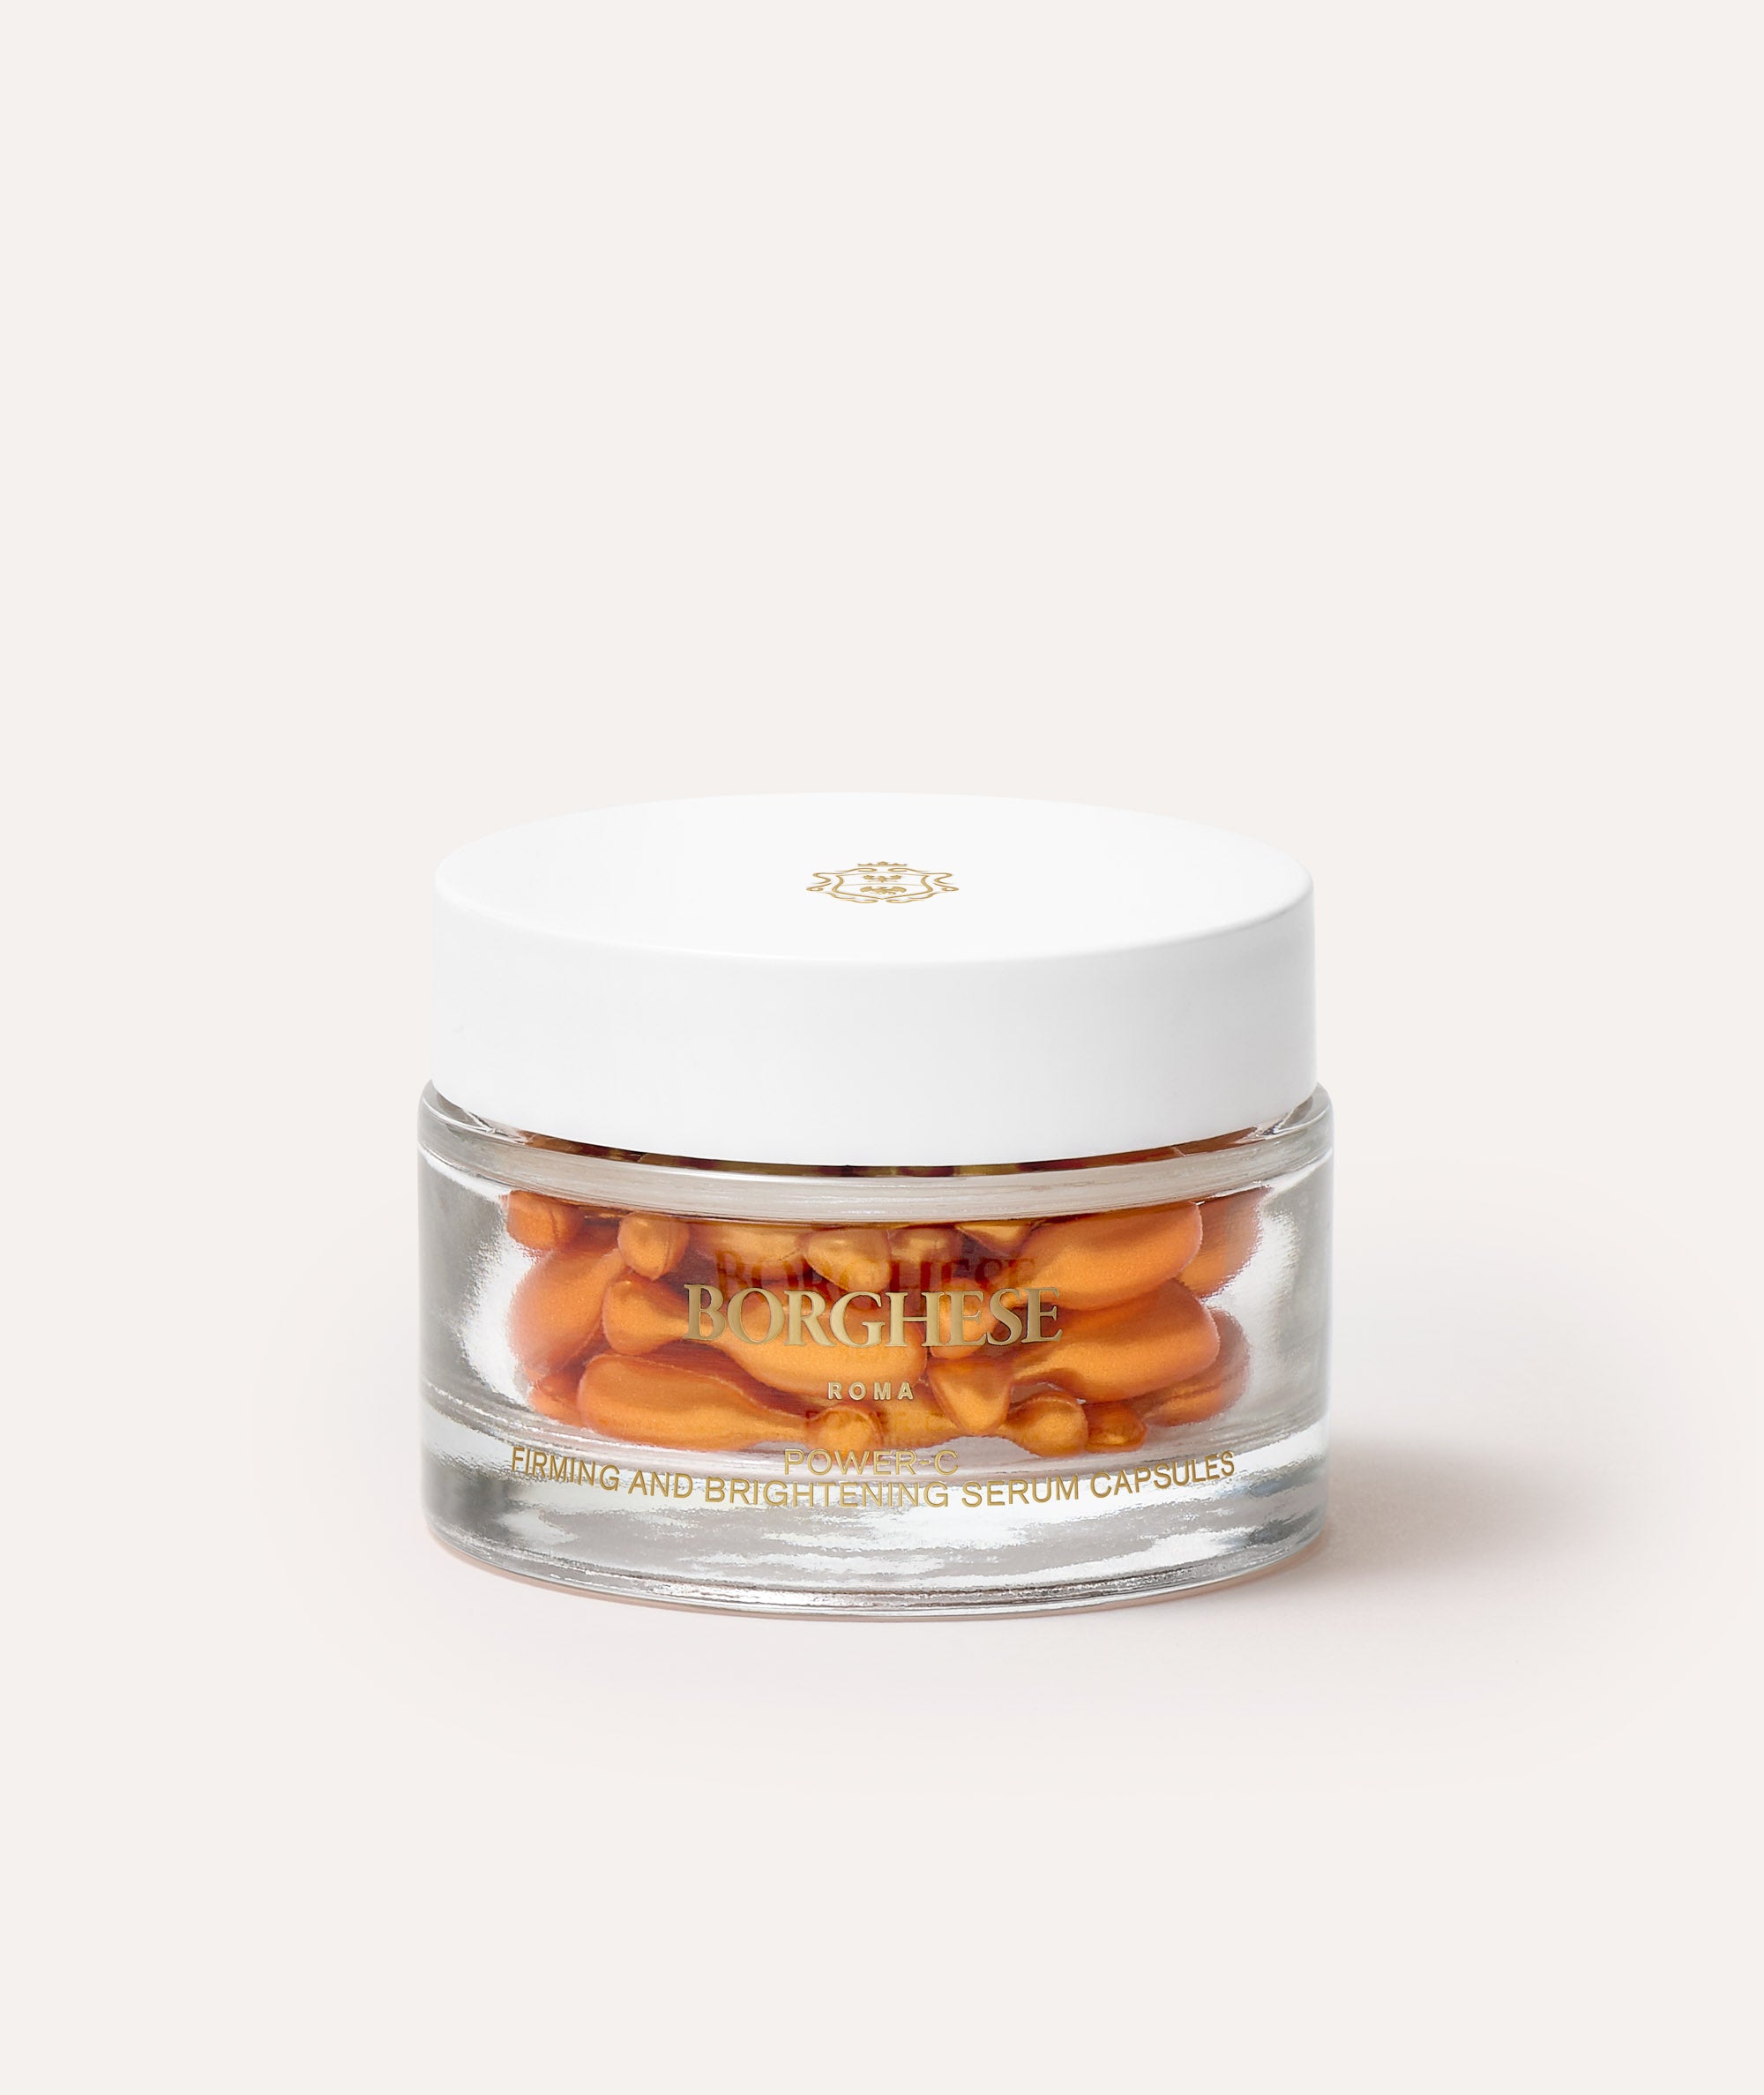 This is a picture of the Borghese Power-C Firming & Brightening Serum Capsules in a glass jar